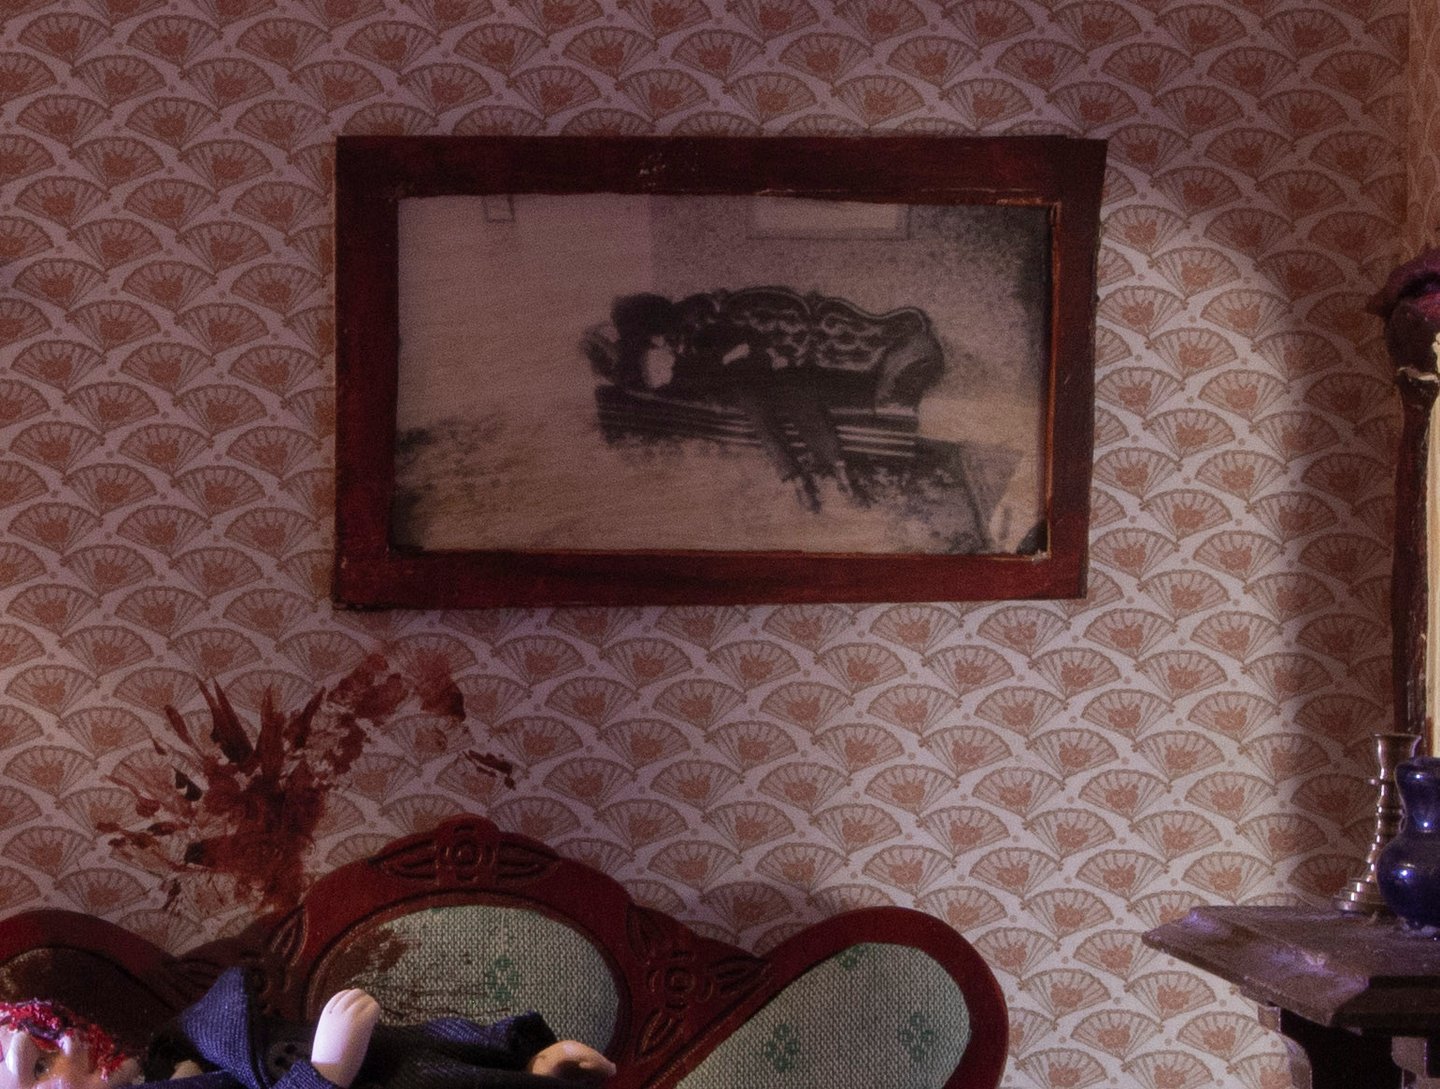 This photograph shows a close up of the wall of the dollhouse, where we see the picture that Zefyr described placing on the wall (of the father's own crime scene) above the doll laid out on the couch, blood spatters above his head.